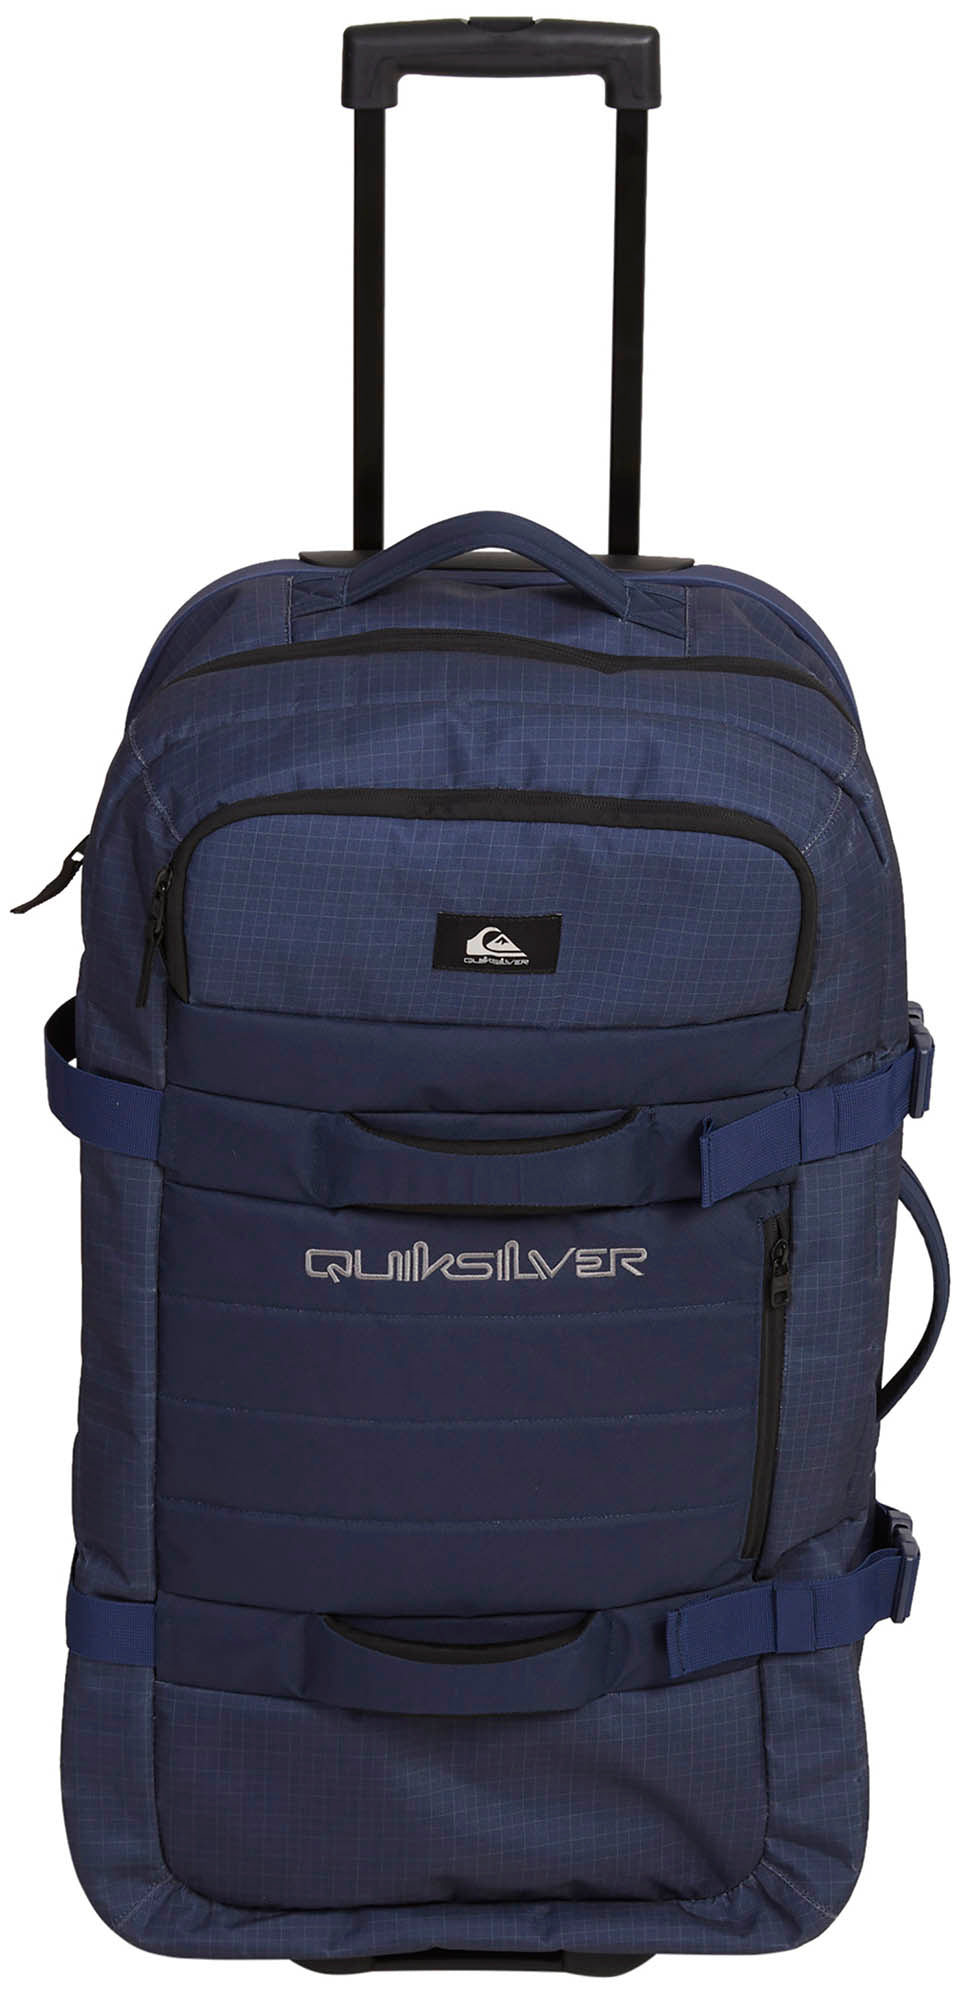 Quiksilver New Suitcase - Reach – thebackpacker 100L Naval Academy